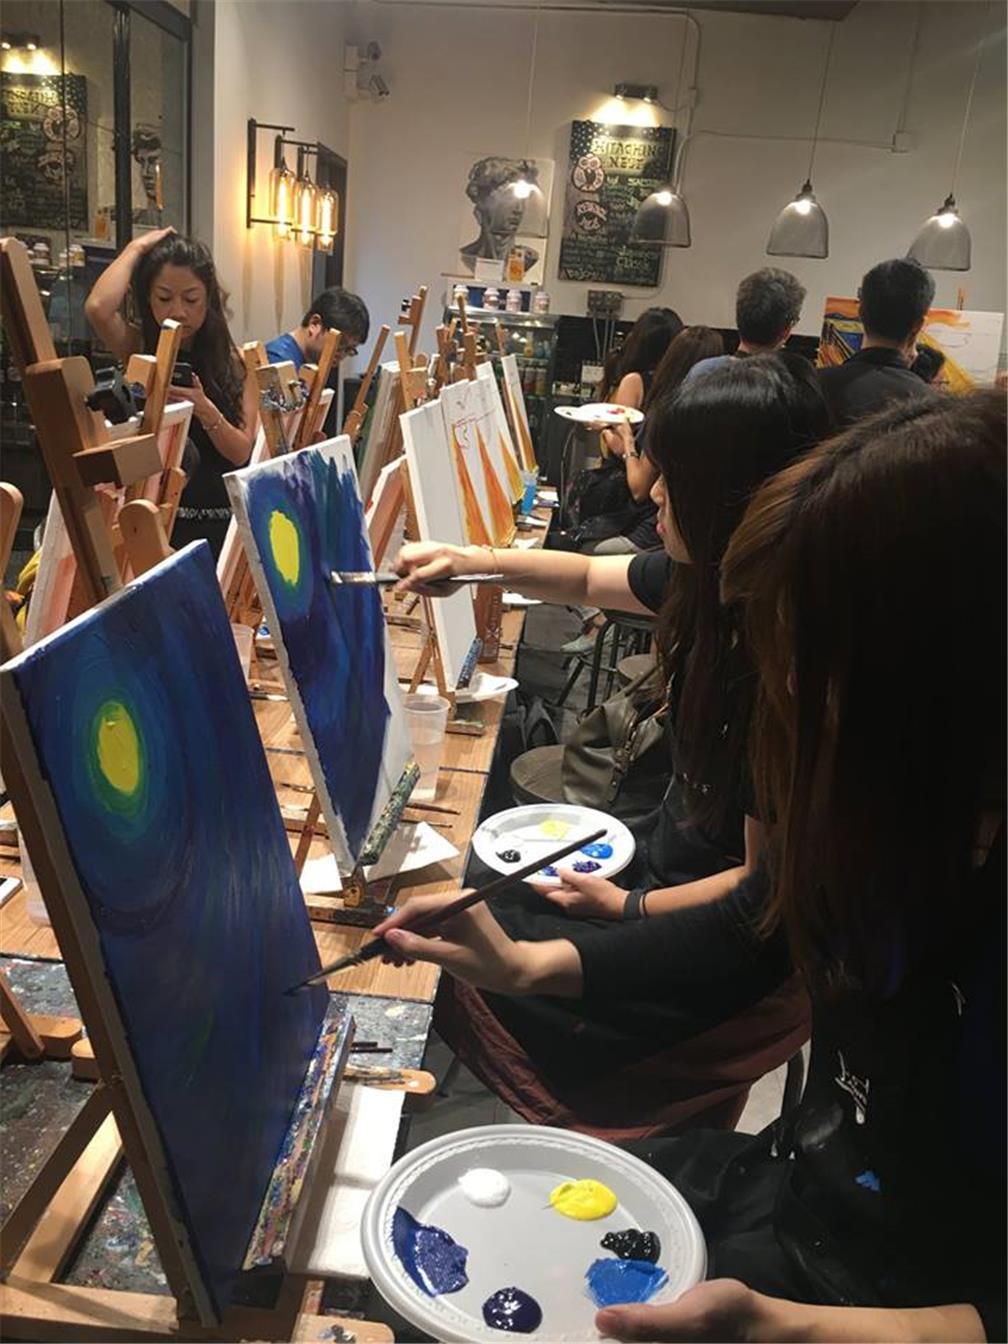 Participants totally immersed in their painting